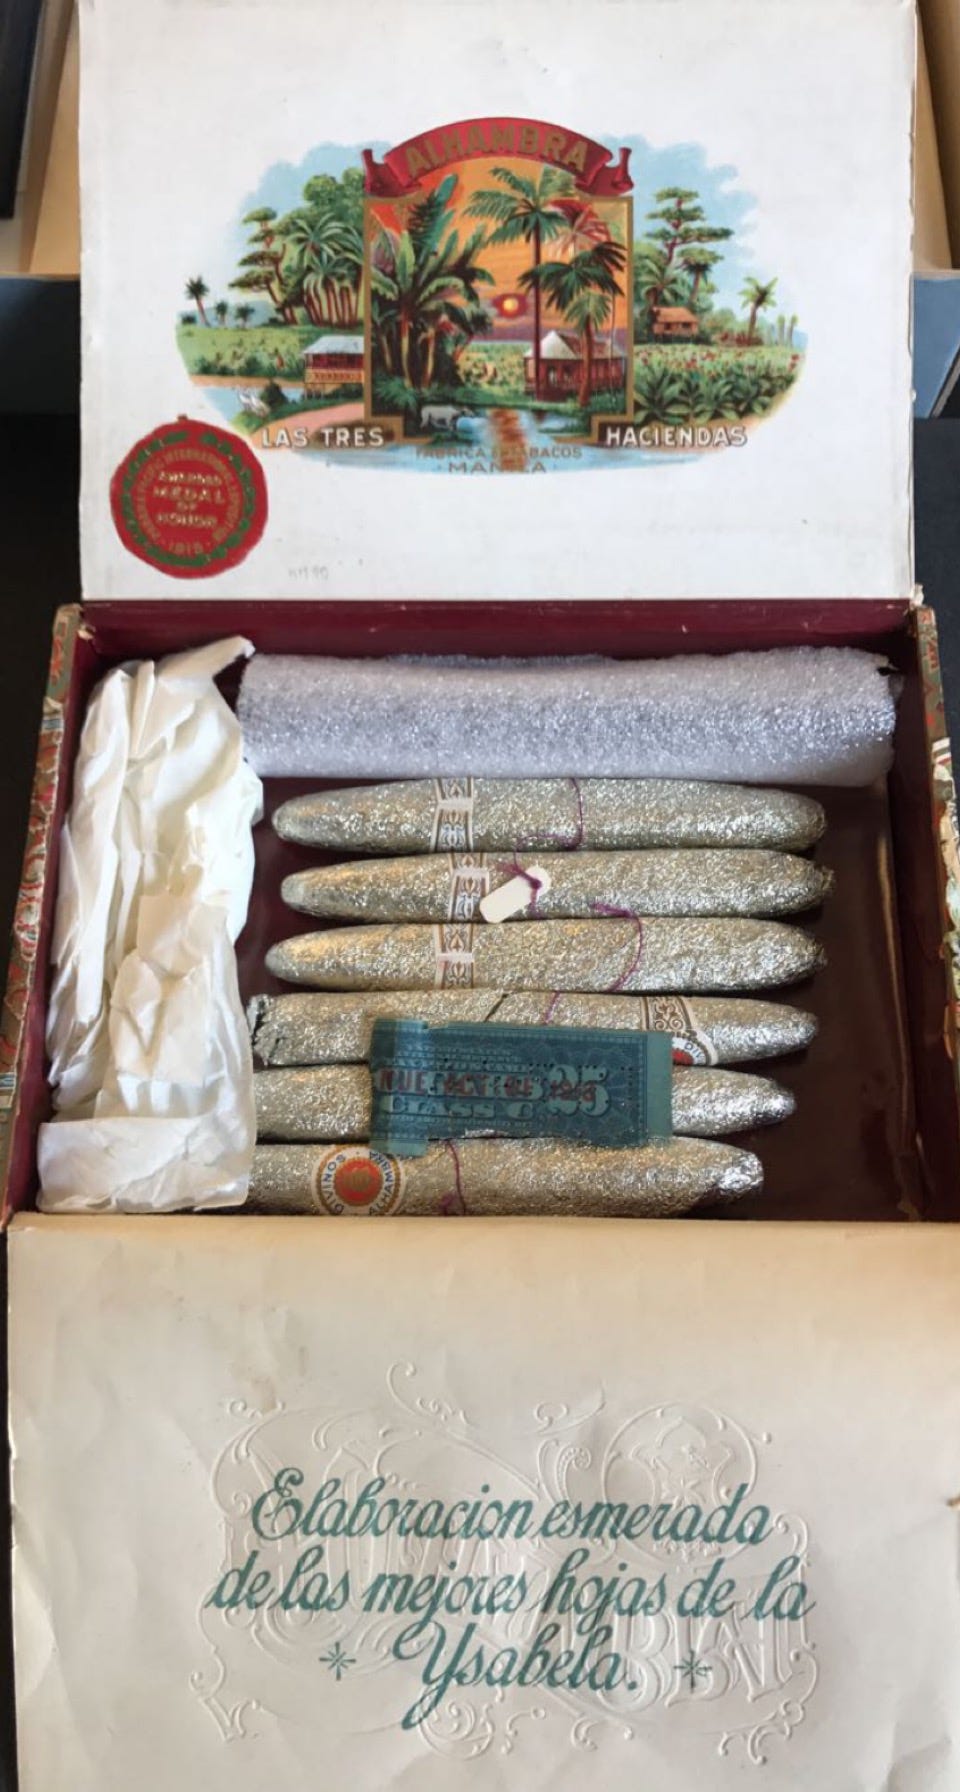 Image of cigar box opened to show six silver-wrapped cigars